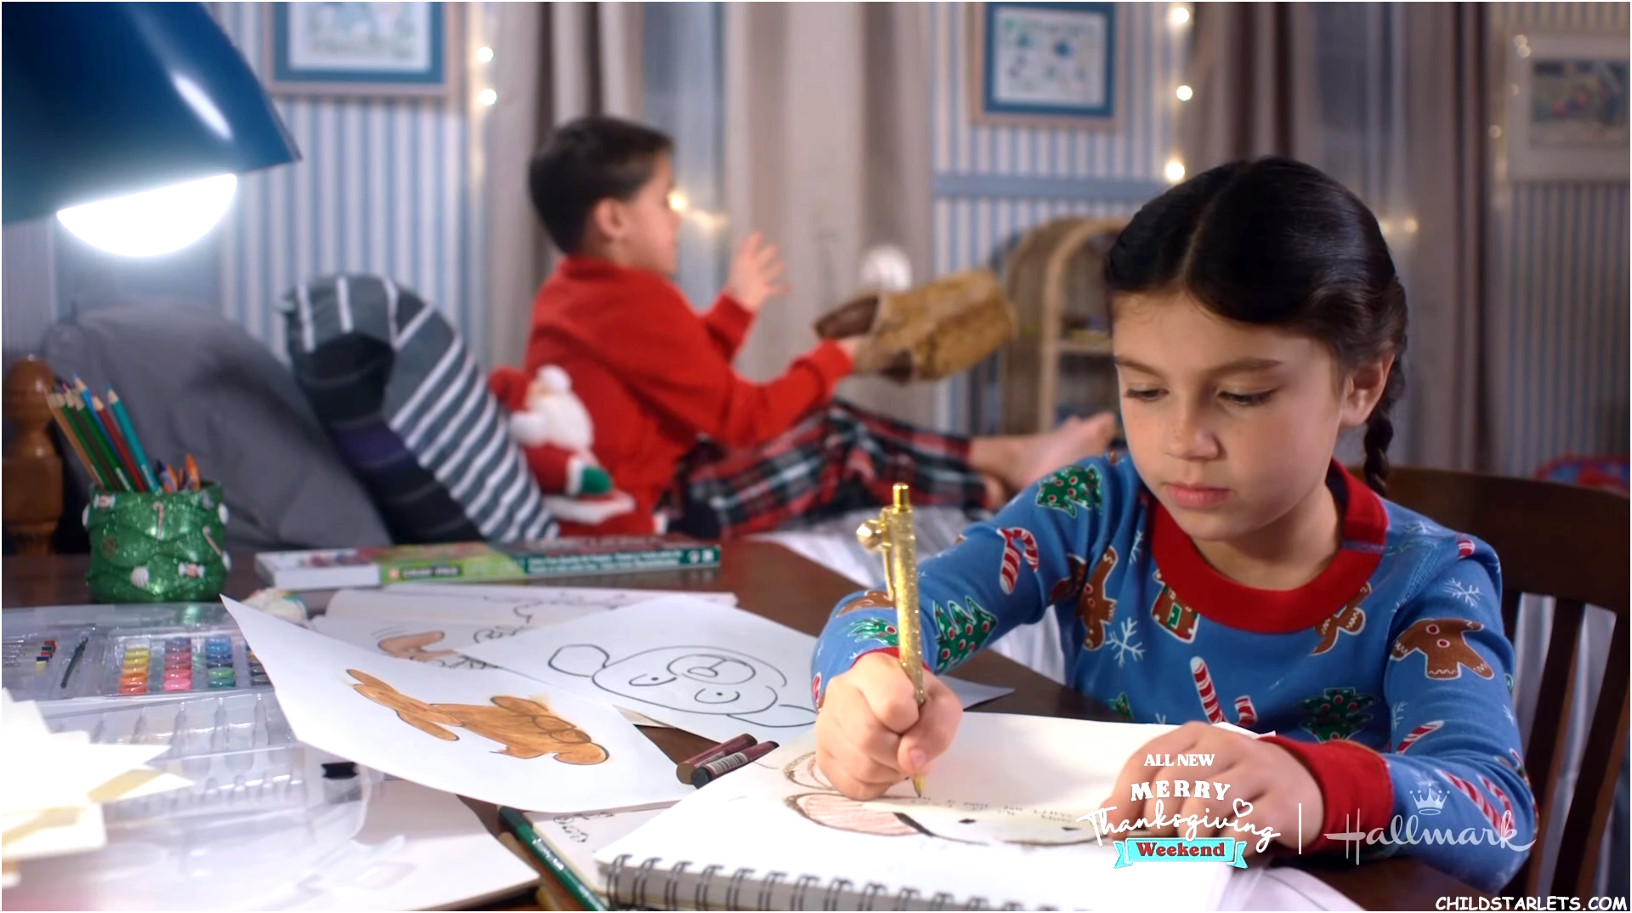 Taylor Pezza
"Letters to Santa" - 2023/HD